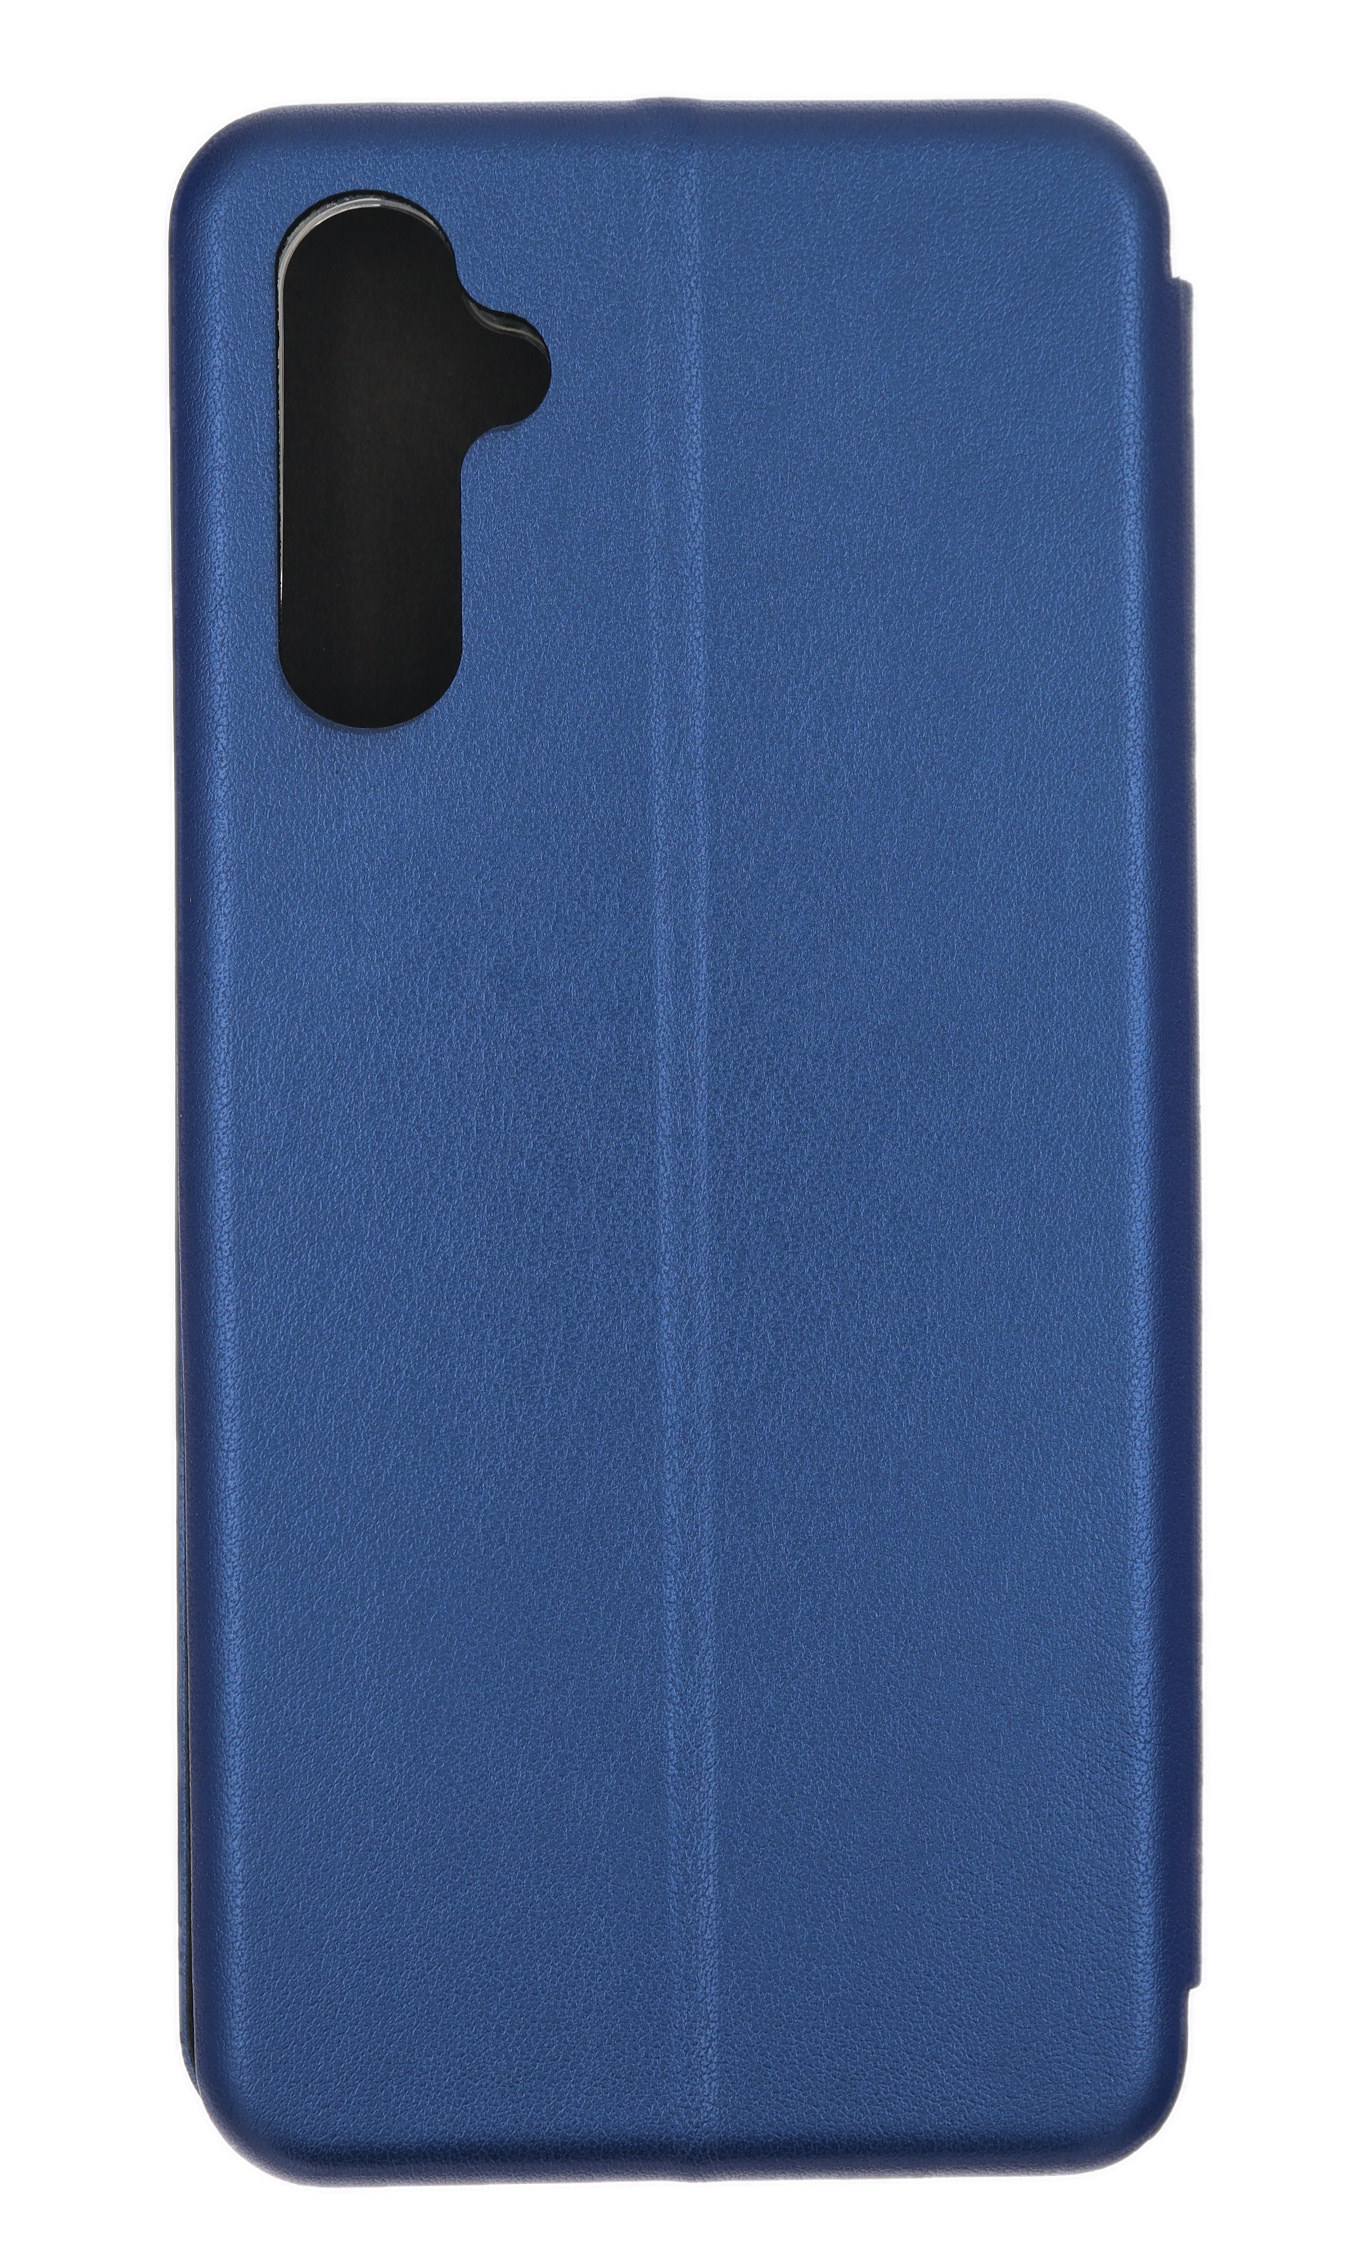 JAMCOVER Bookcase Rounded, 5G, Bookcover, A14, A14 Galaxy Samsung, Galaxy Marineblau